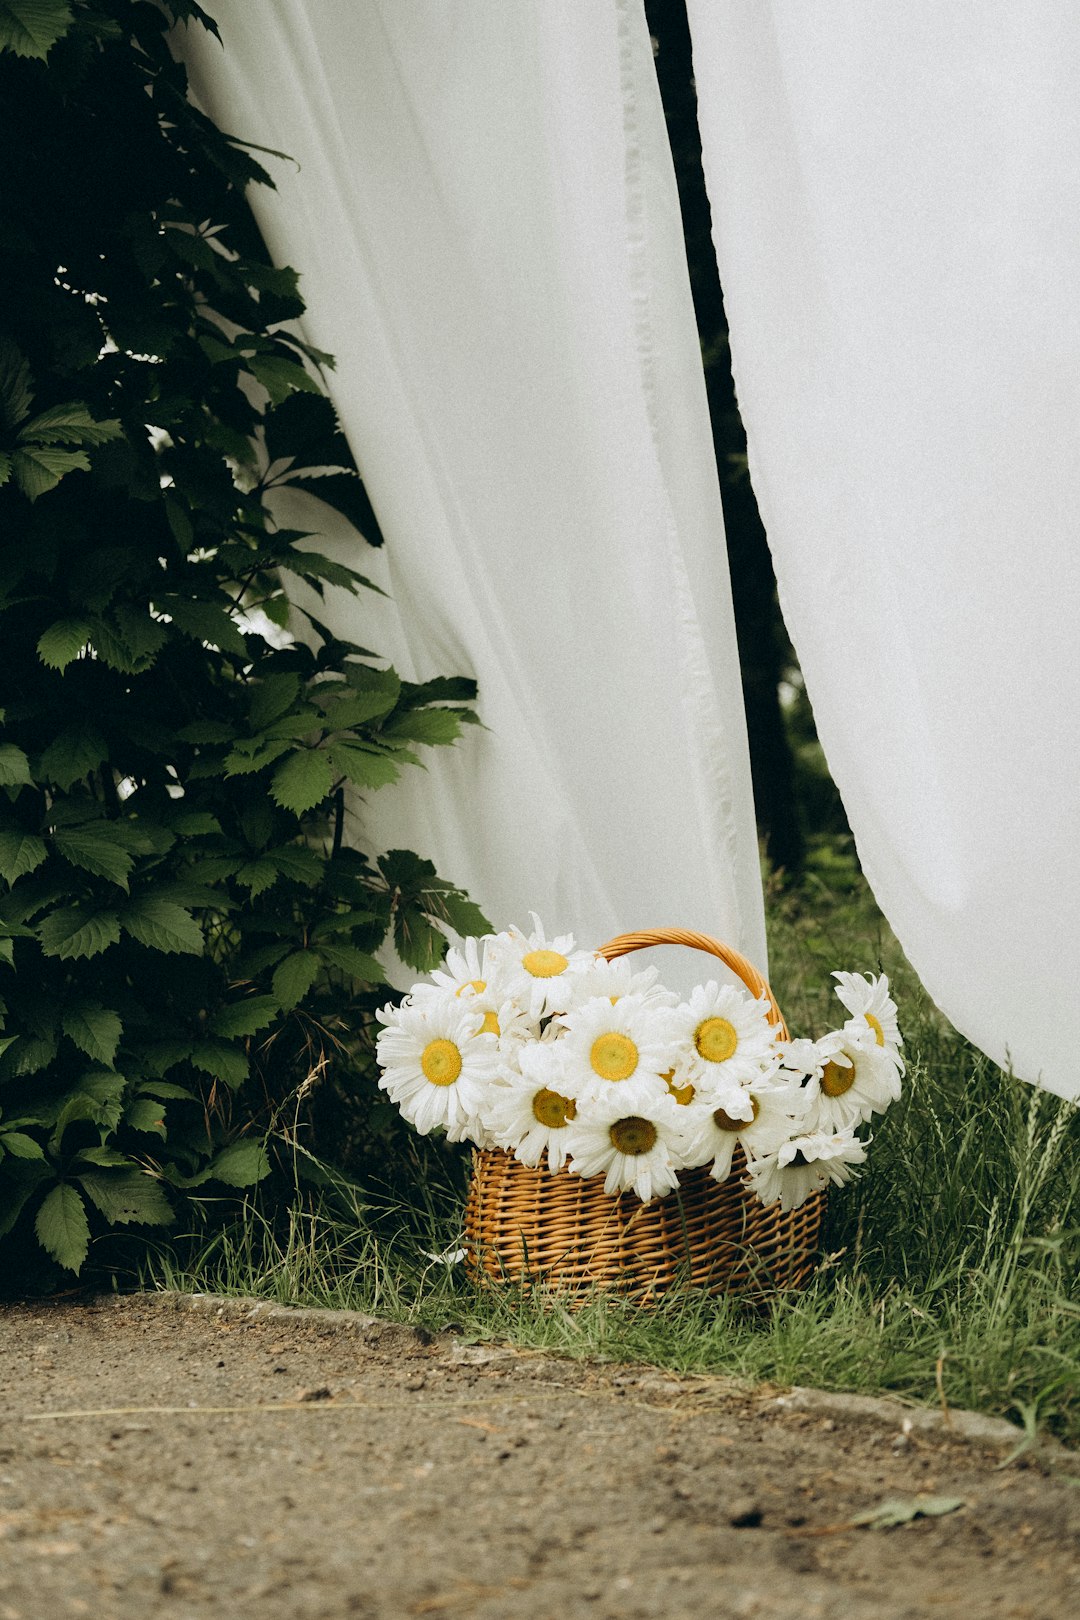 white daisy flowers in brown woven basket